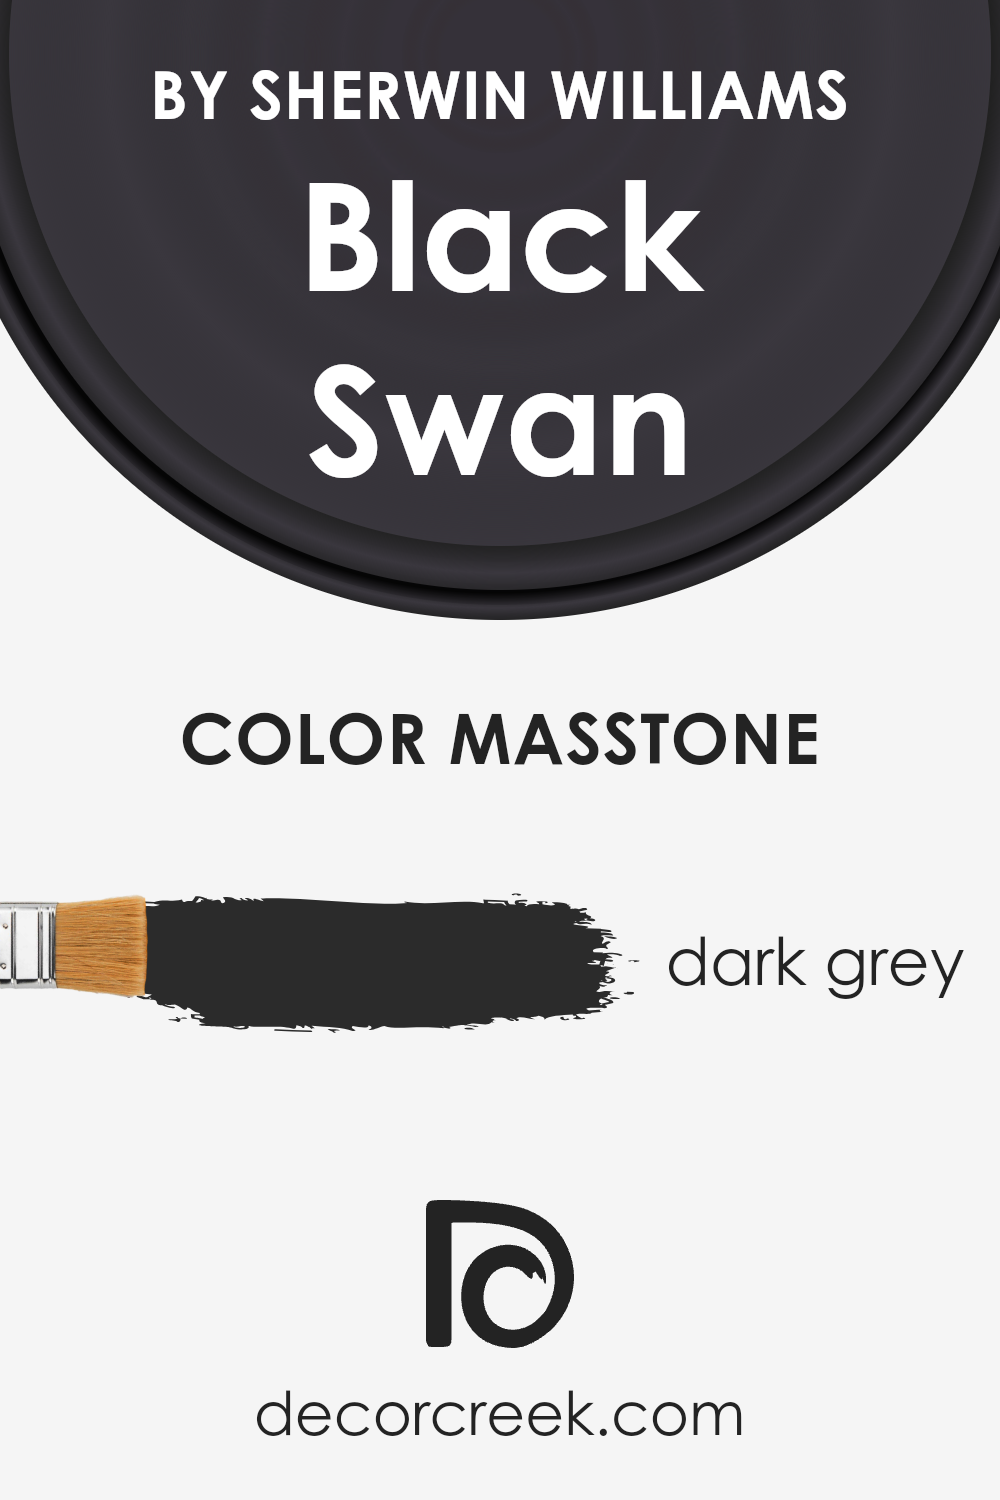 what_is_the_masstone_of_black_swan_sw_6279